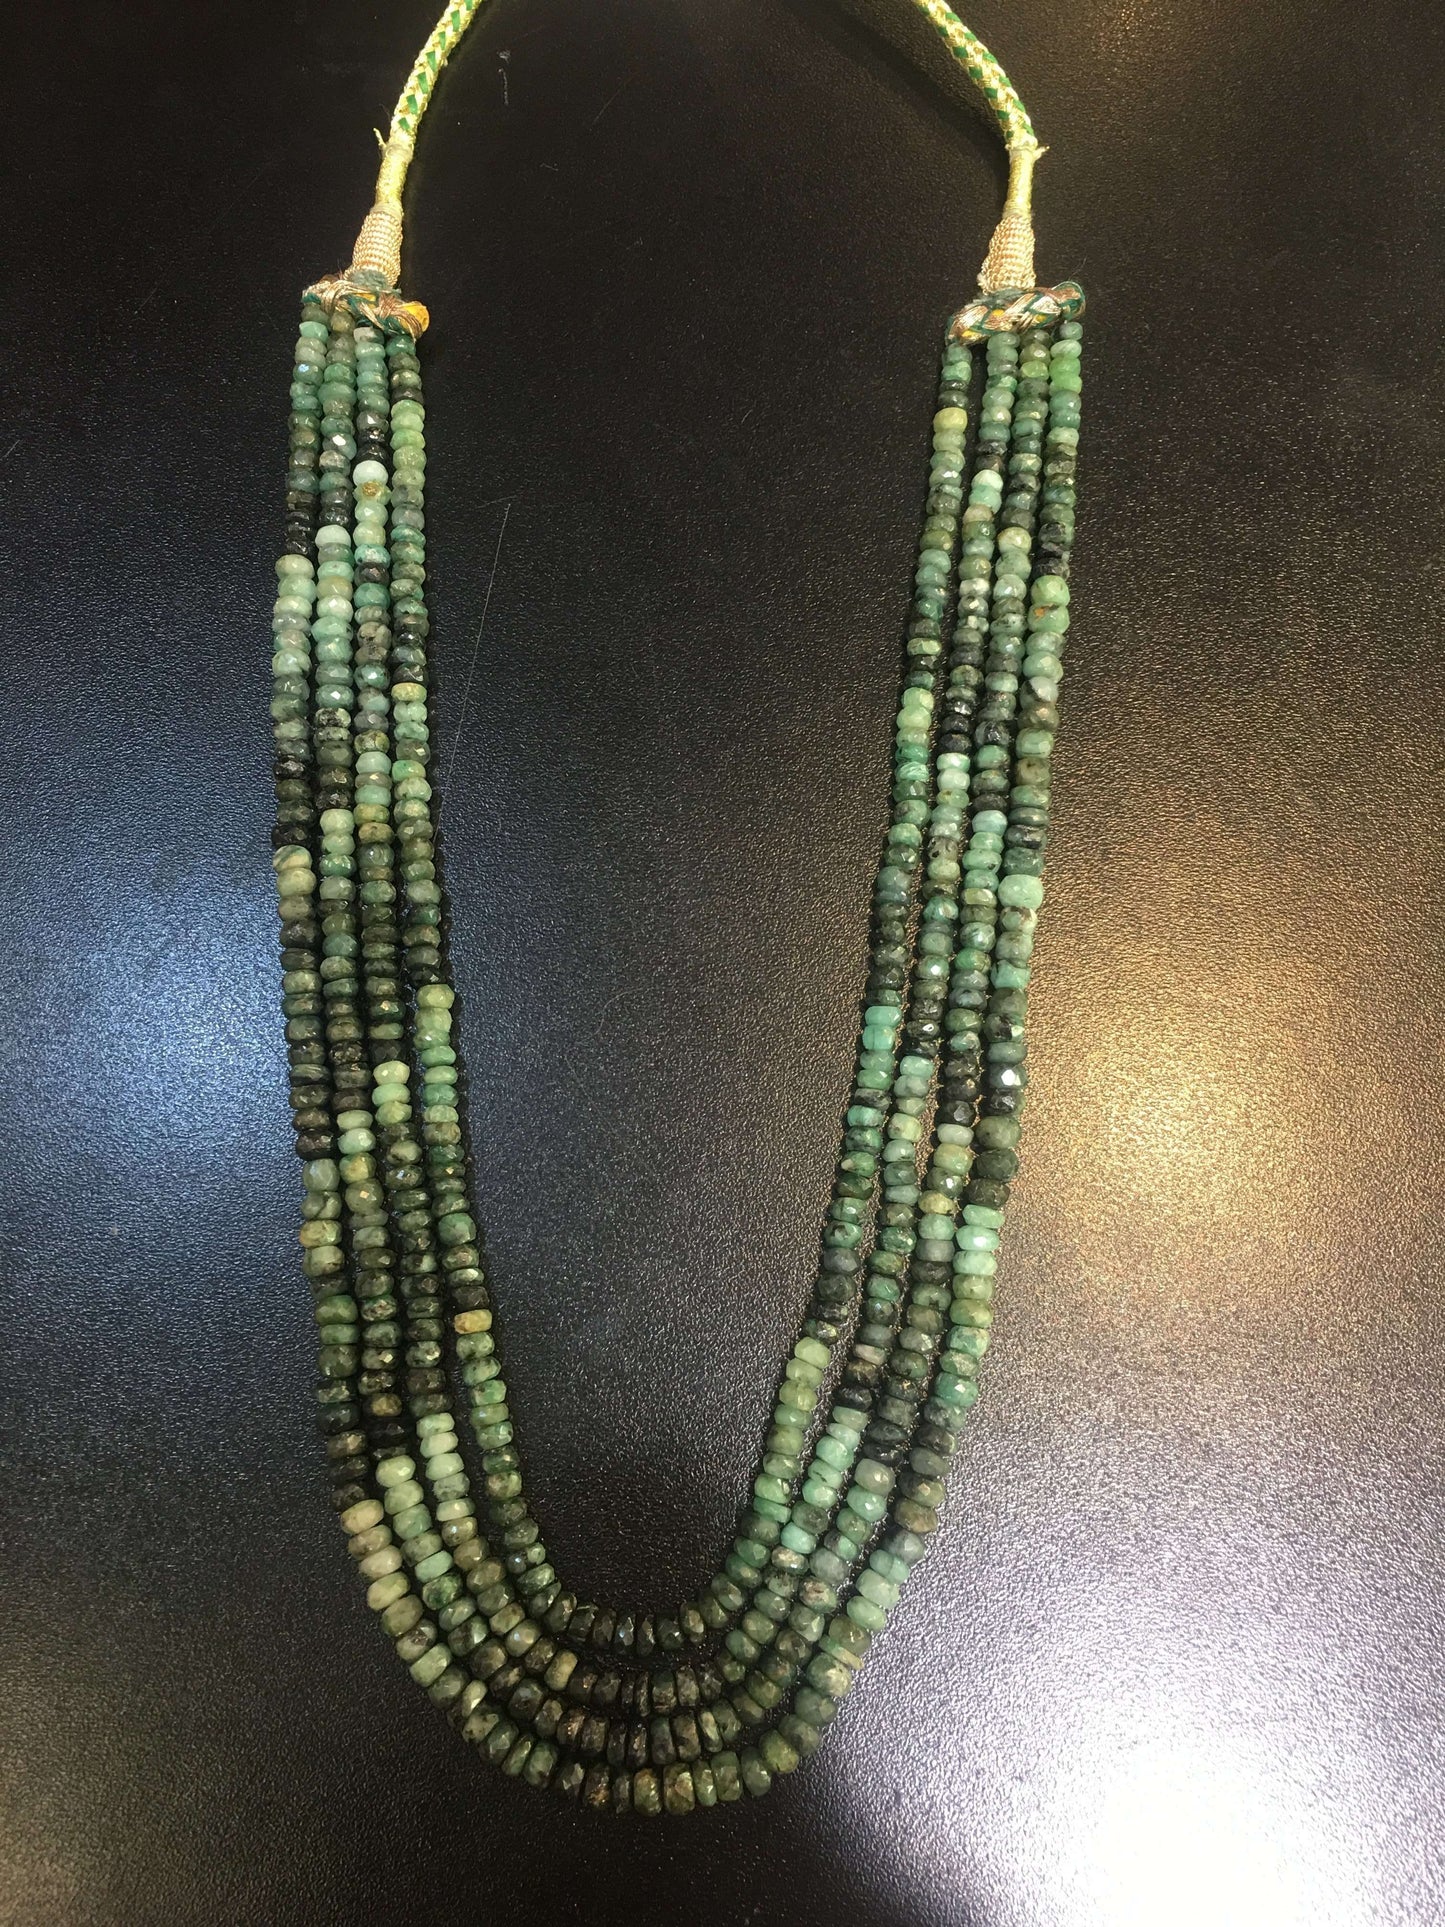 Emerald Beads Necklace 4 strings